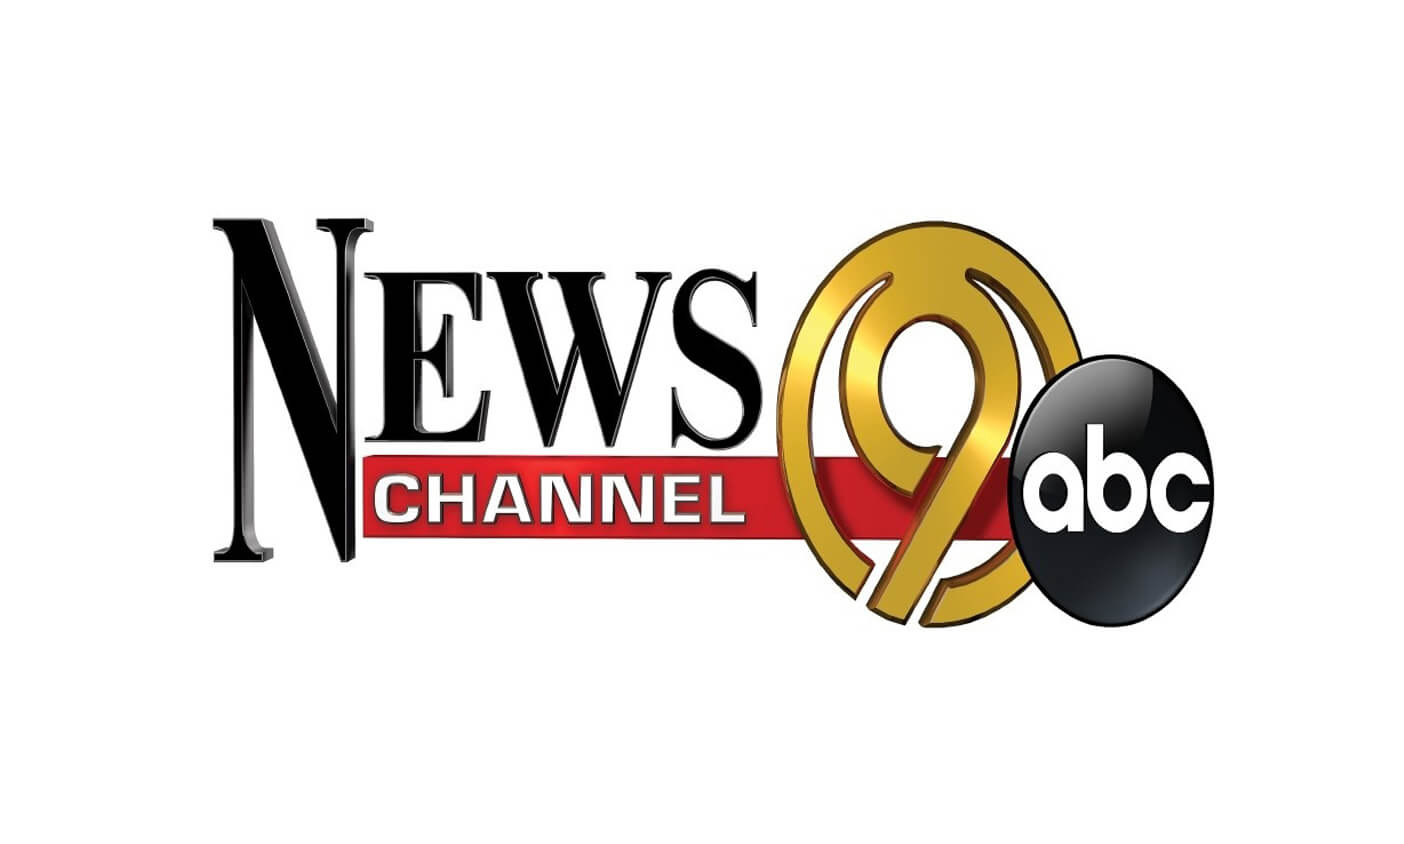 Channel 9: “Plans For Floating Center In Oswego”